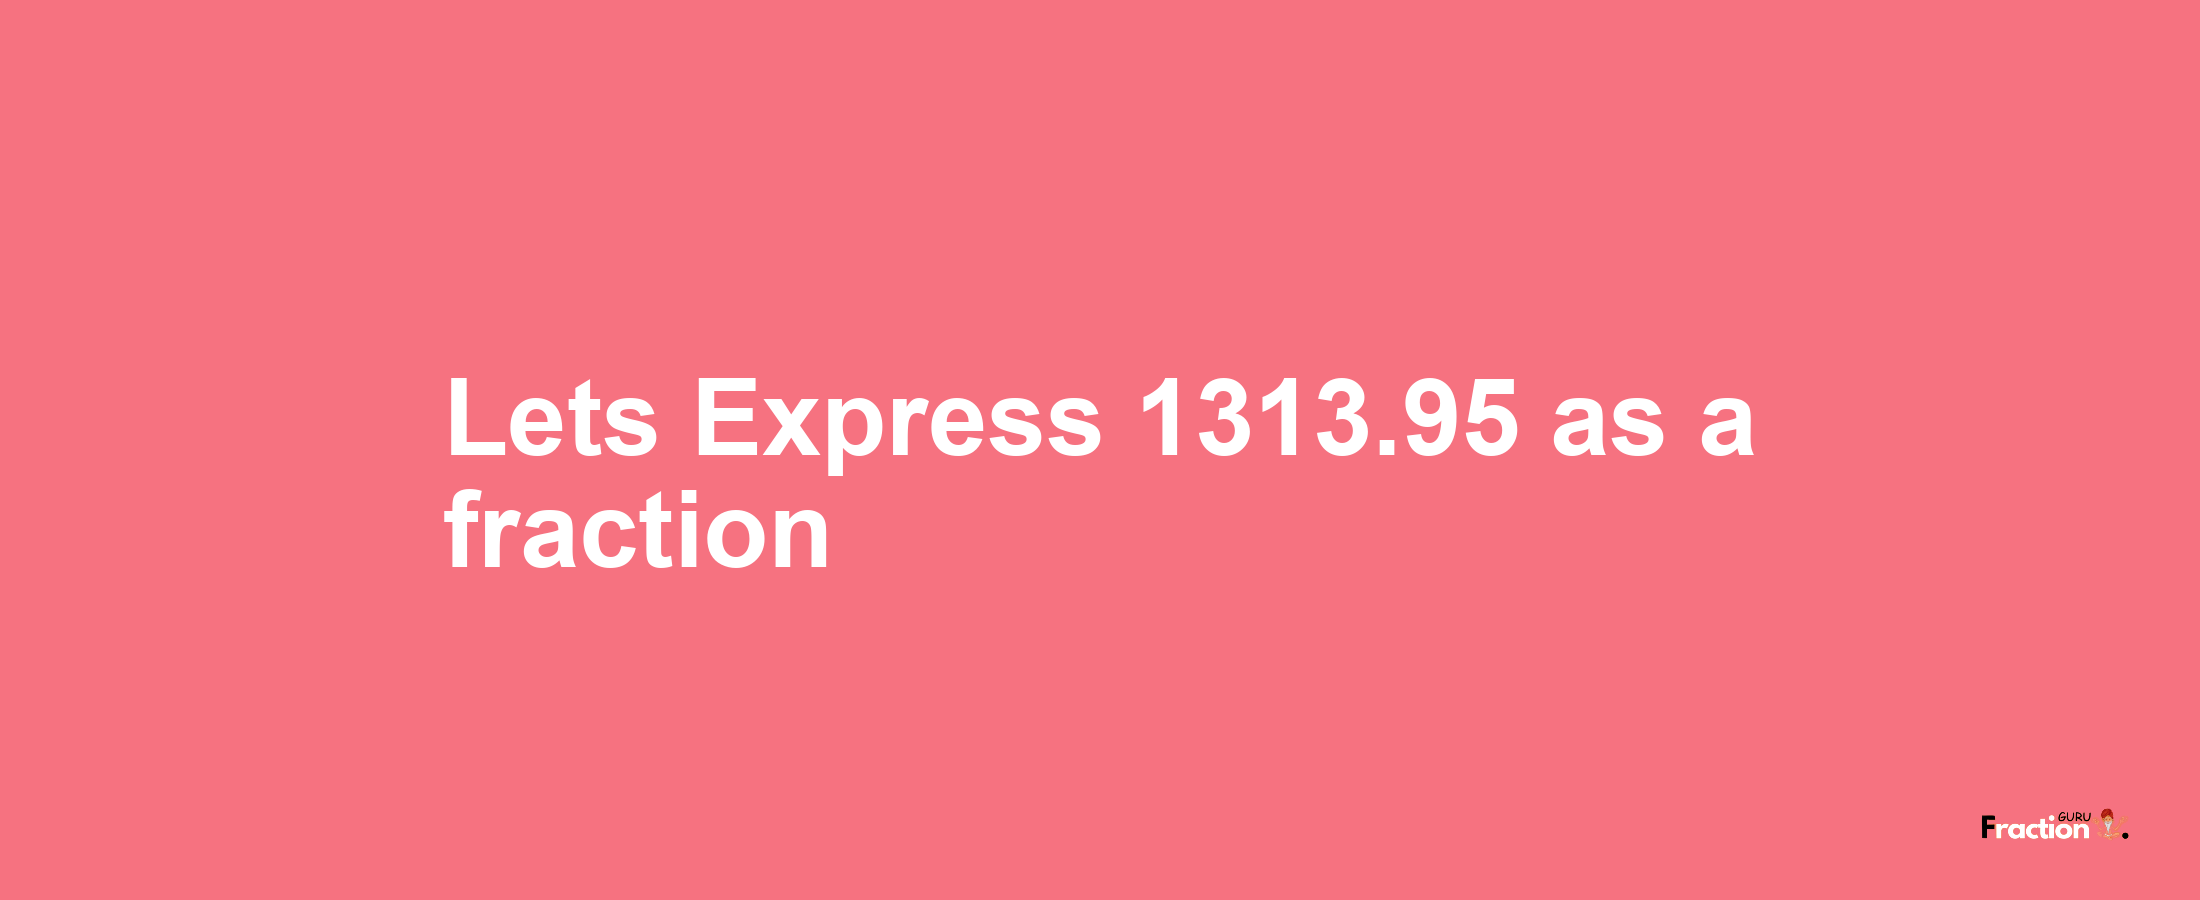 Lets Express 1313.95 as afraction